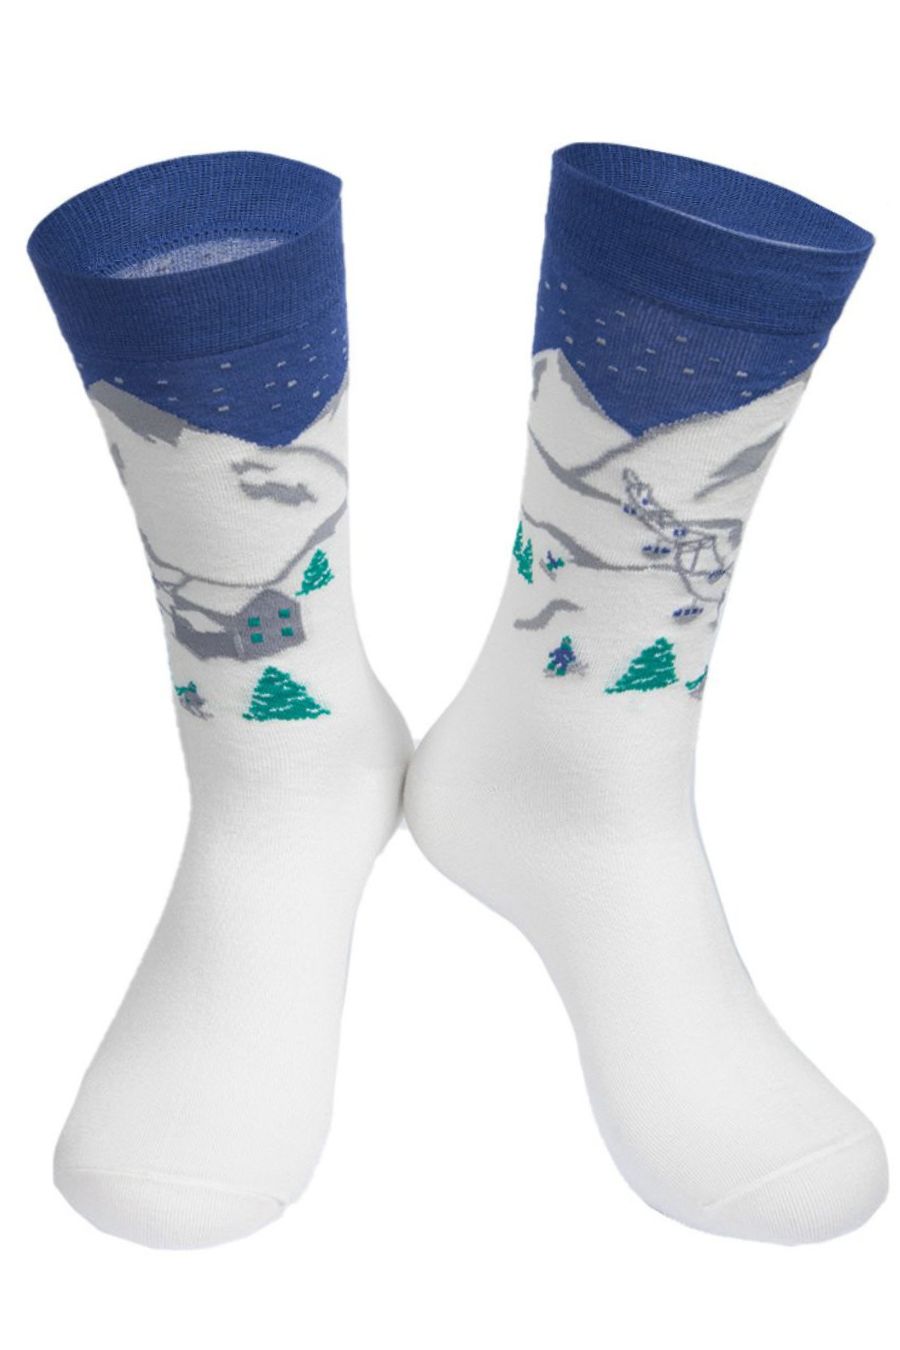 bamboo dress socks designed to look like a snowy mountain side with skiers